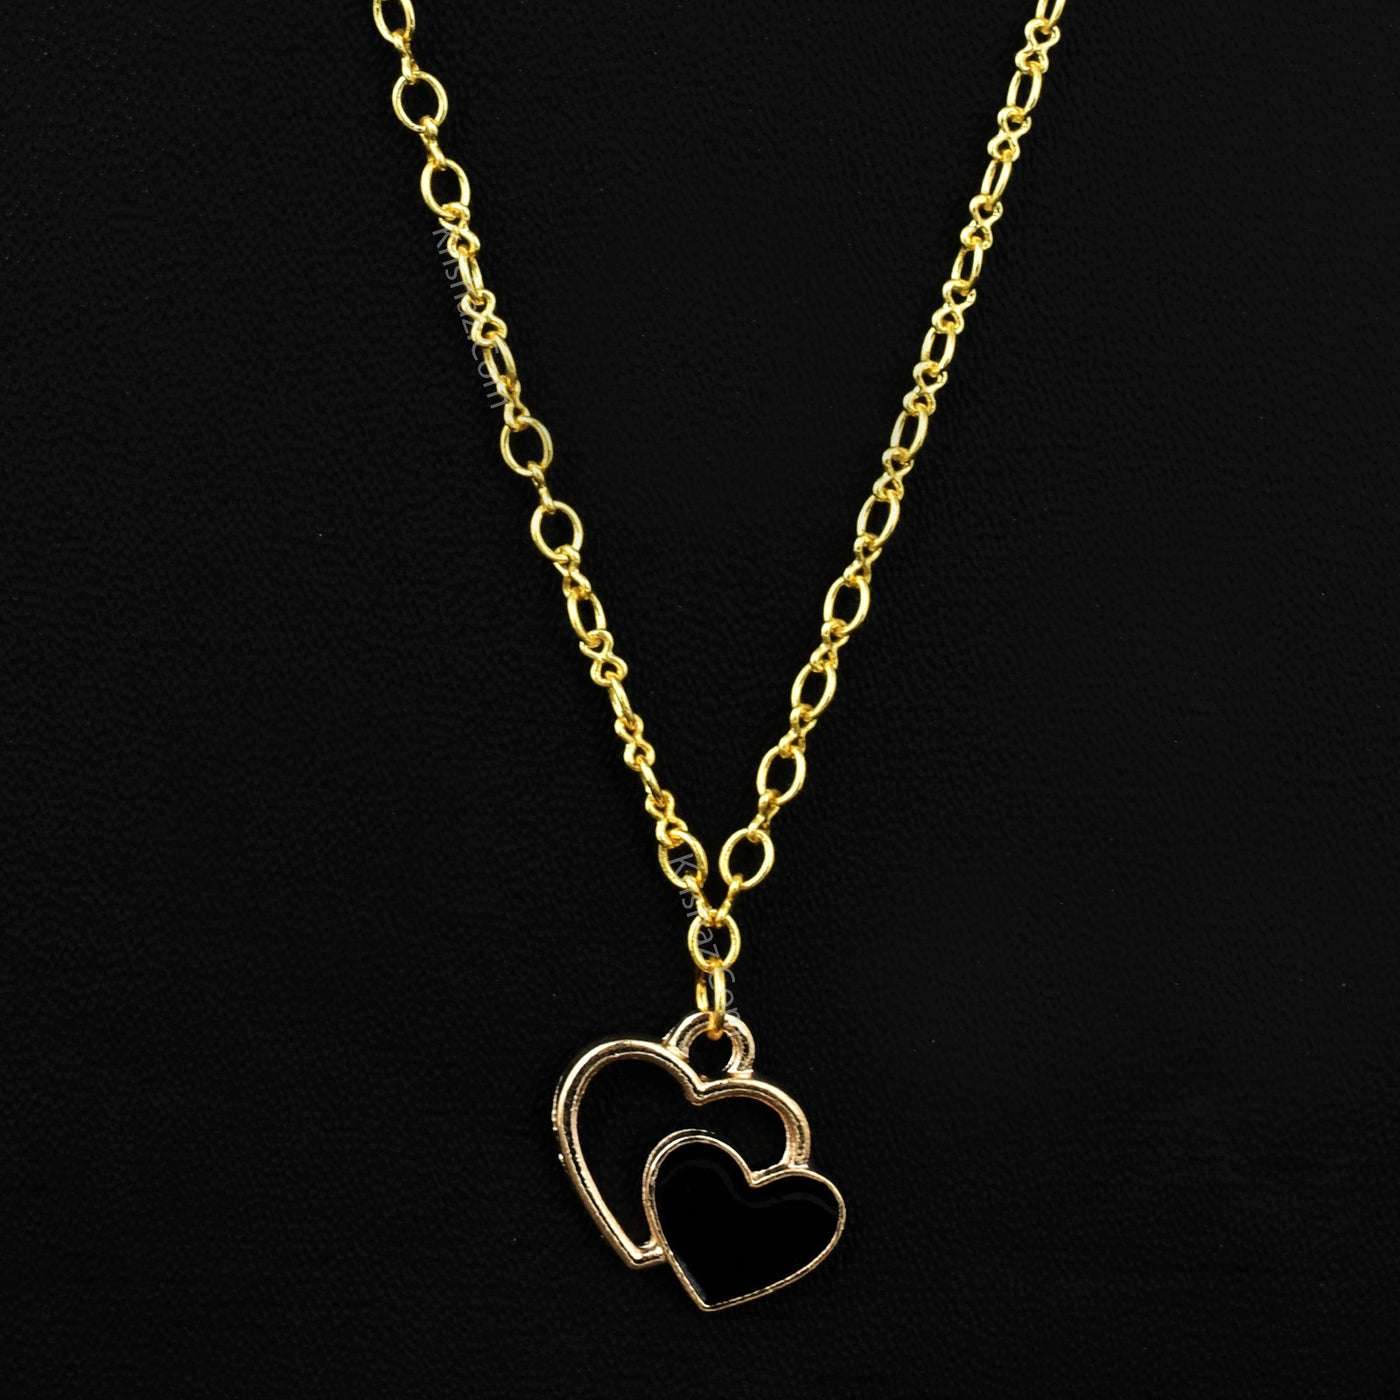 Gold Figure 8 Dainty Chains with Black Heart charms